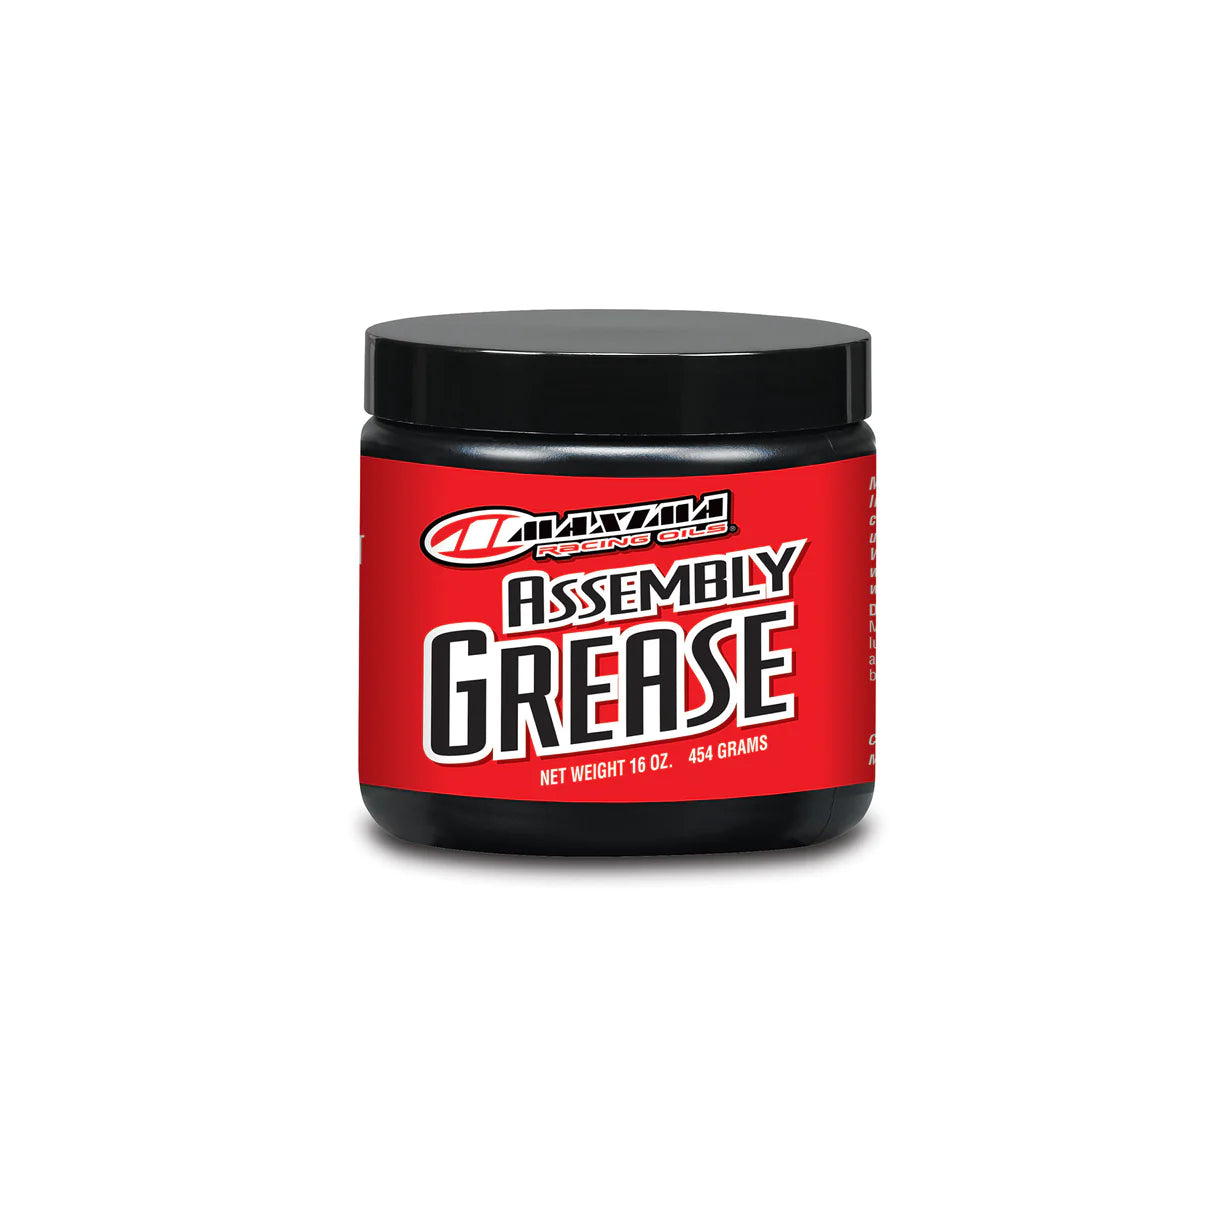 ASSEMBLY GREASE